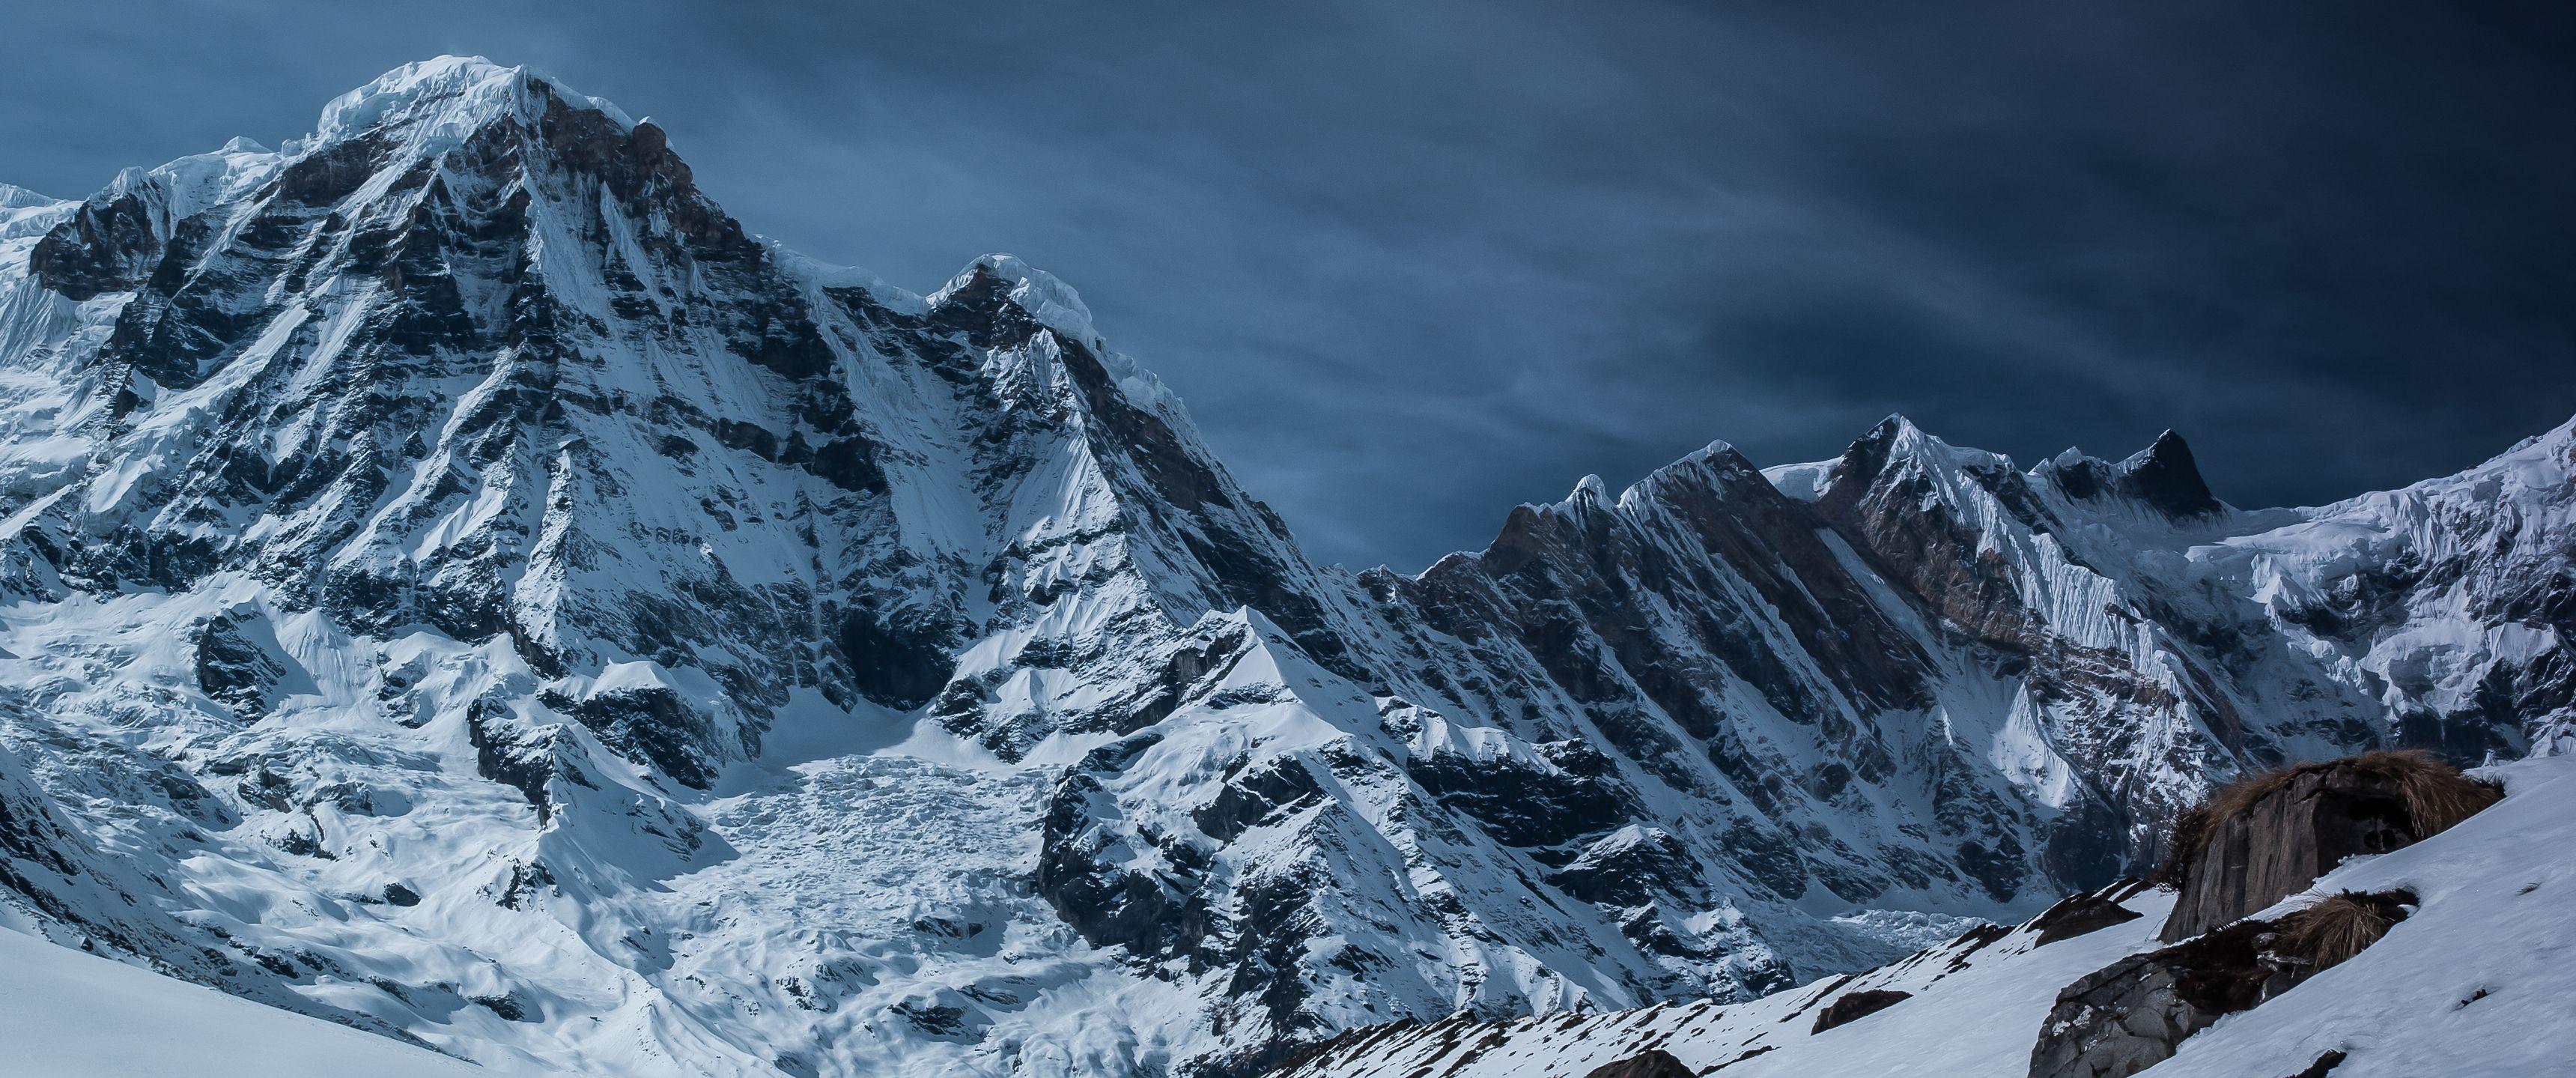 Snow Covered Mountains Ultrawide HD Wallpaper